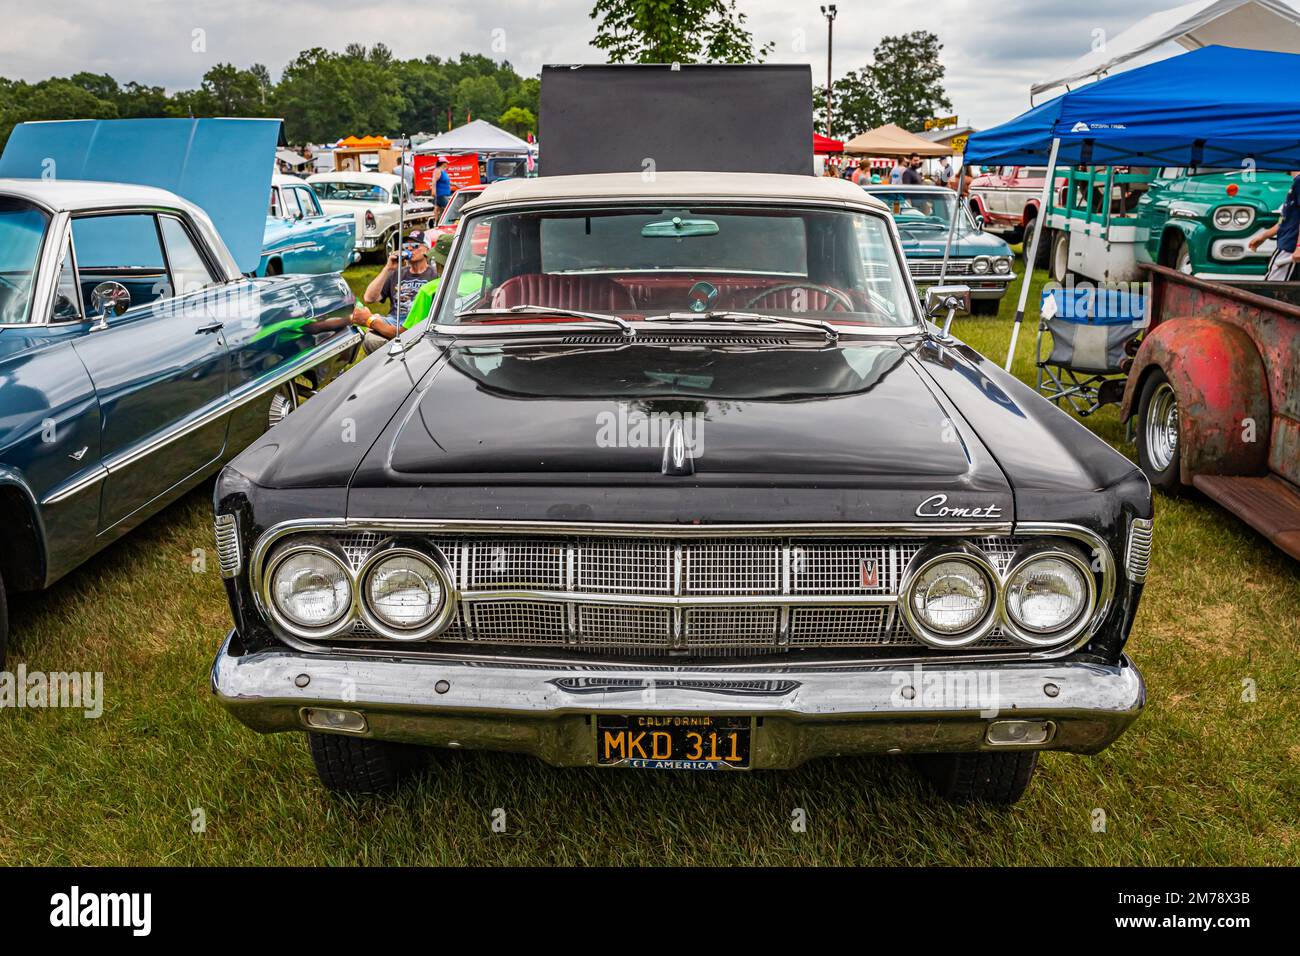 Iola, WI - July 07, 2022: High perspective front view of a 1964 Mercury Comet Caliente Convertible at a local car show. Stock Photo